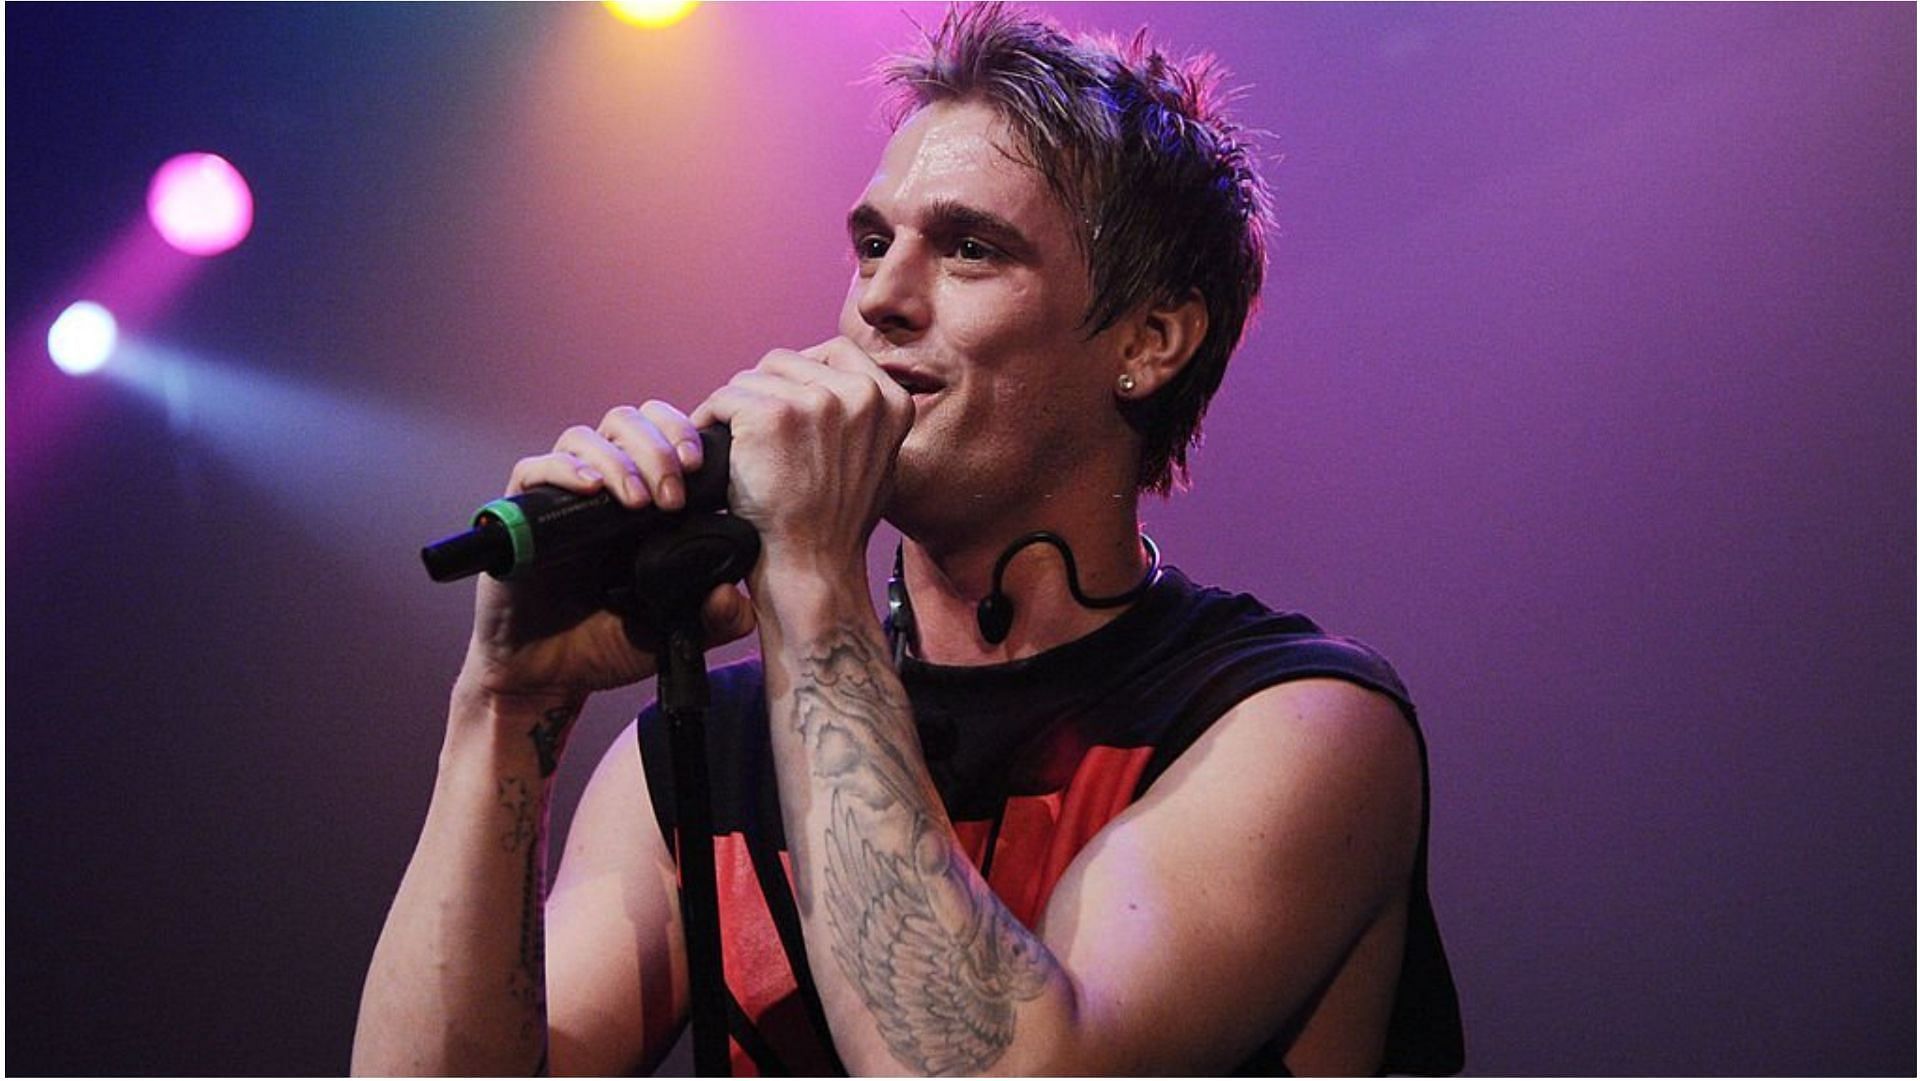 Aaron Carter&#039;s cause of death has not been disclosed yet (Image via Ilya S. Savenok/Getty Images)